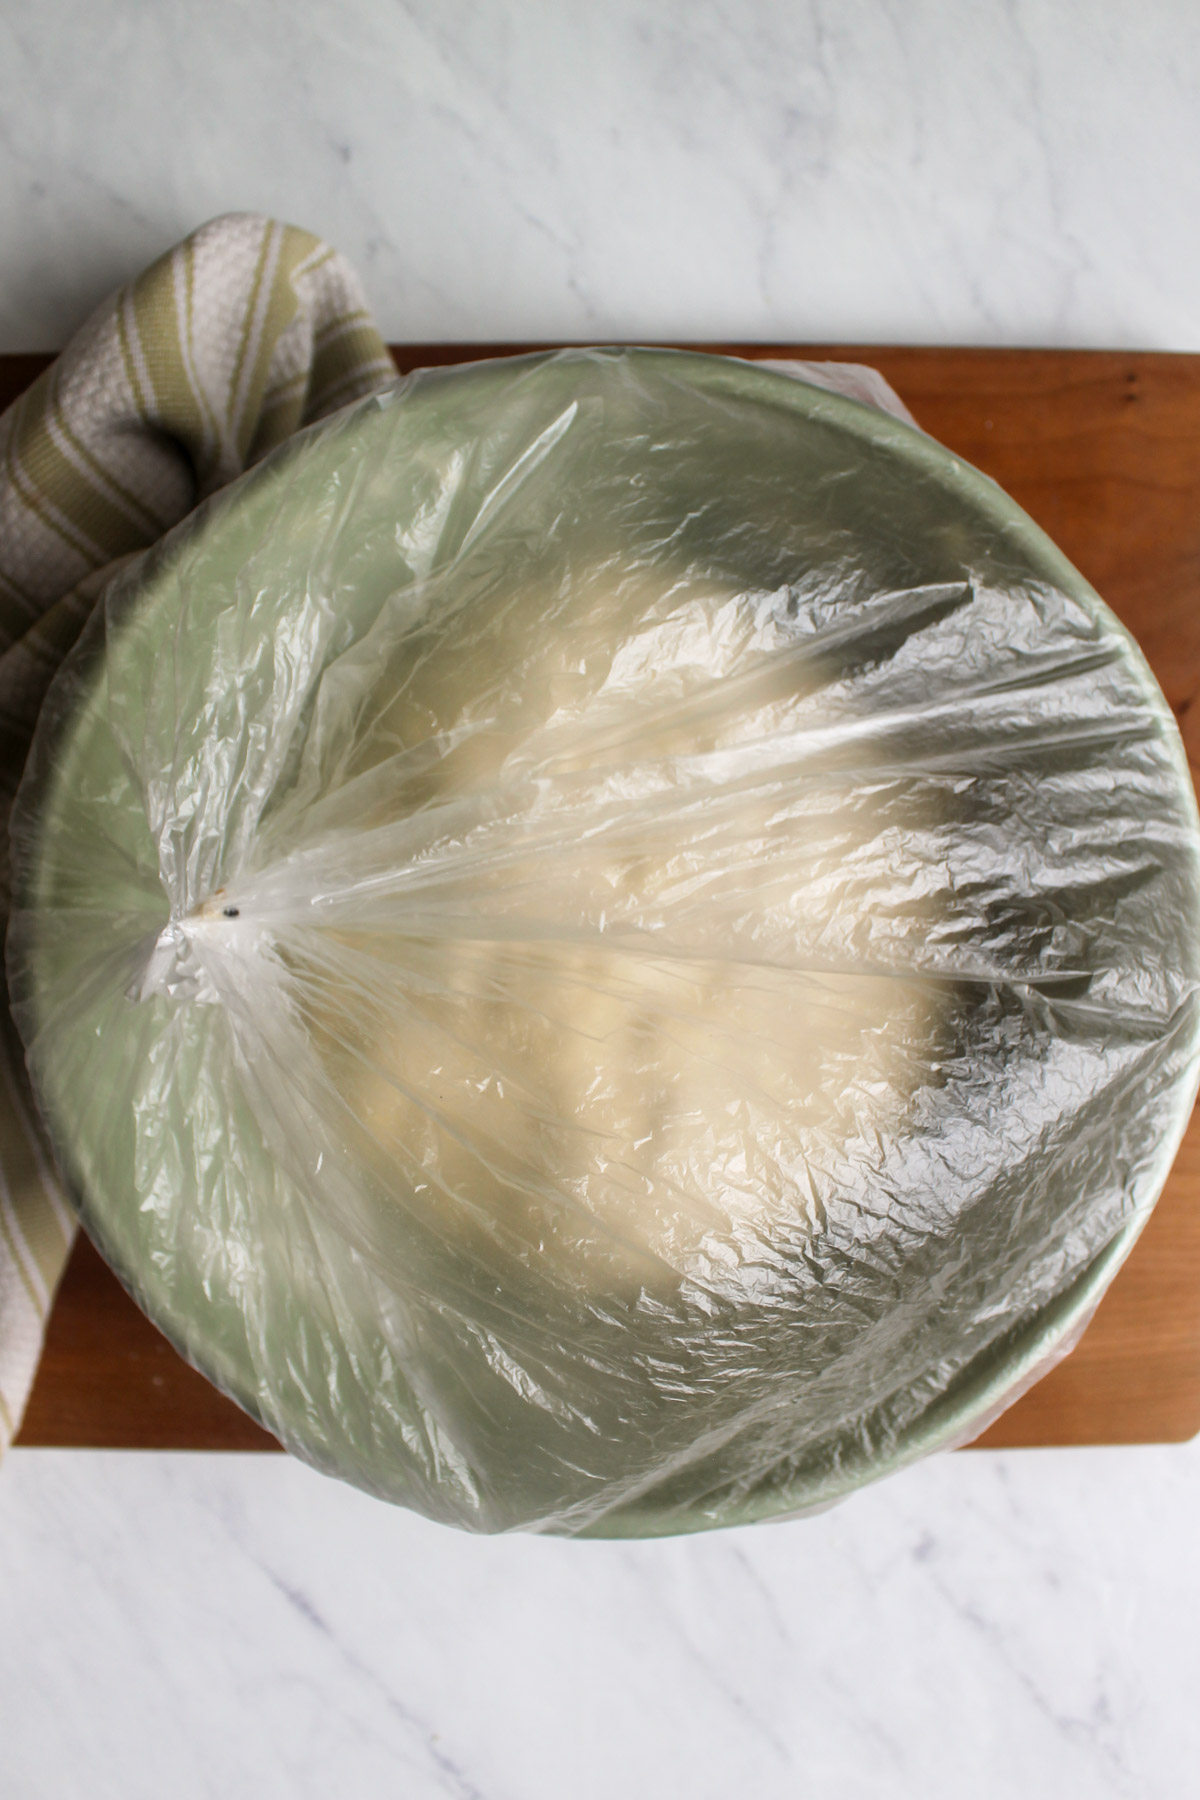 A plastic bag over a bowl of bread dough ready to sit out overnight.